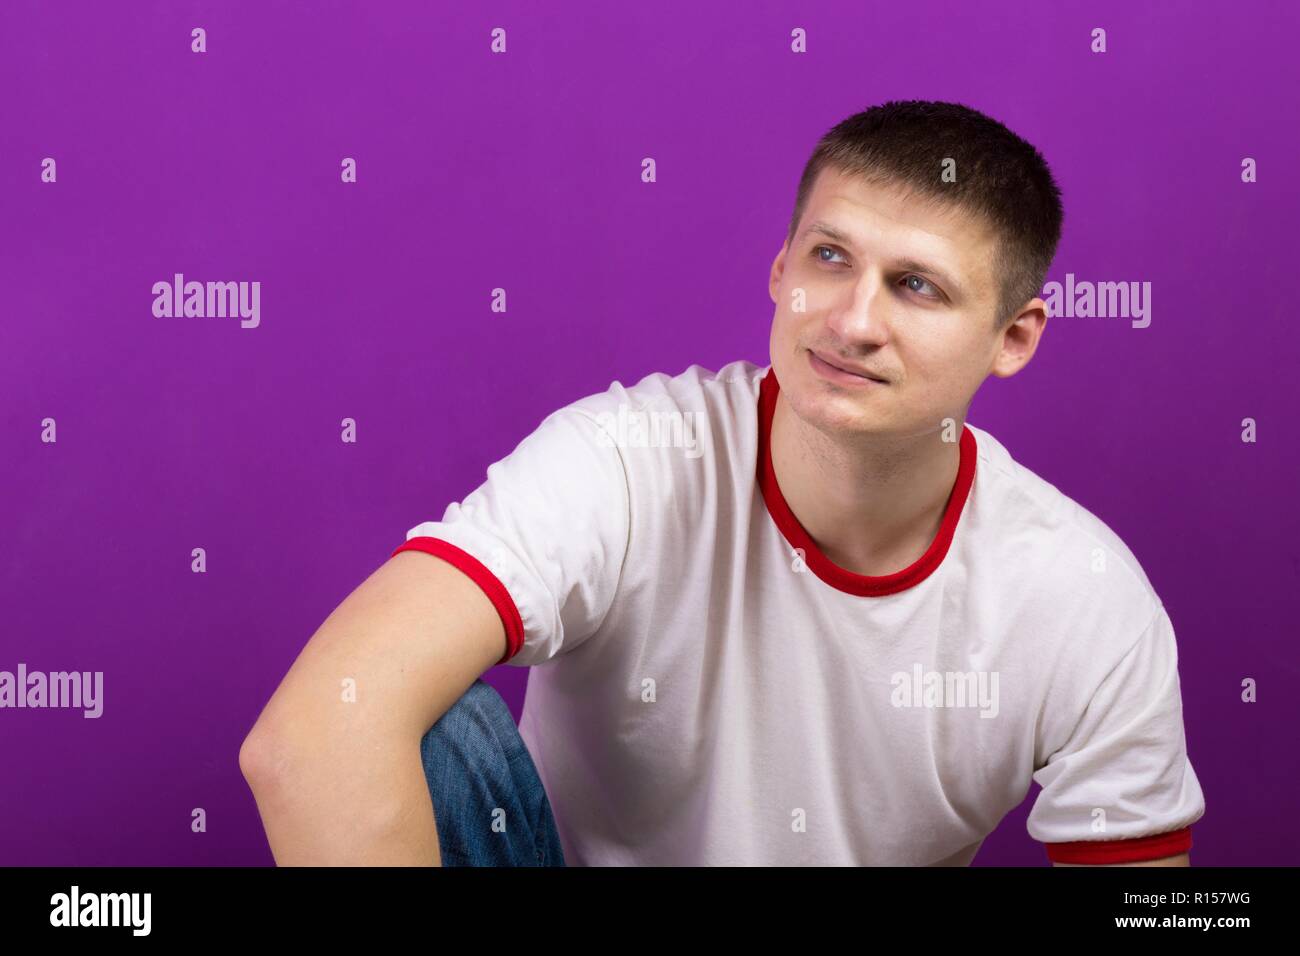 young handsome man posing on purple background Stock Photo